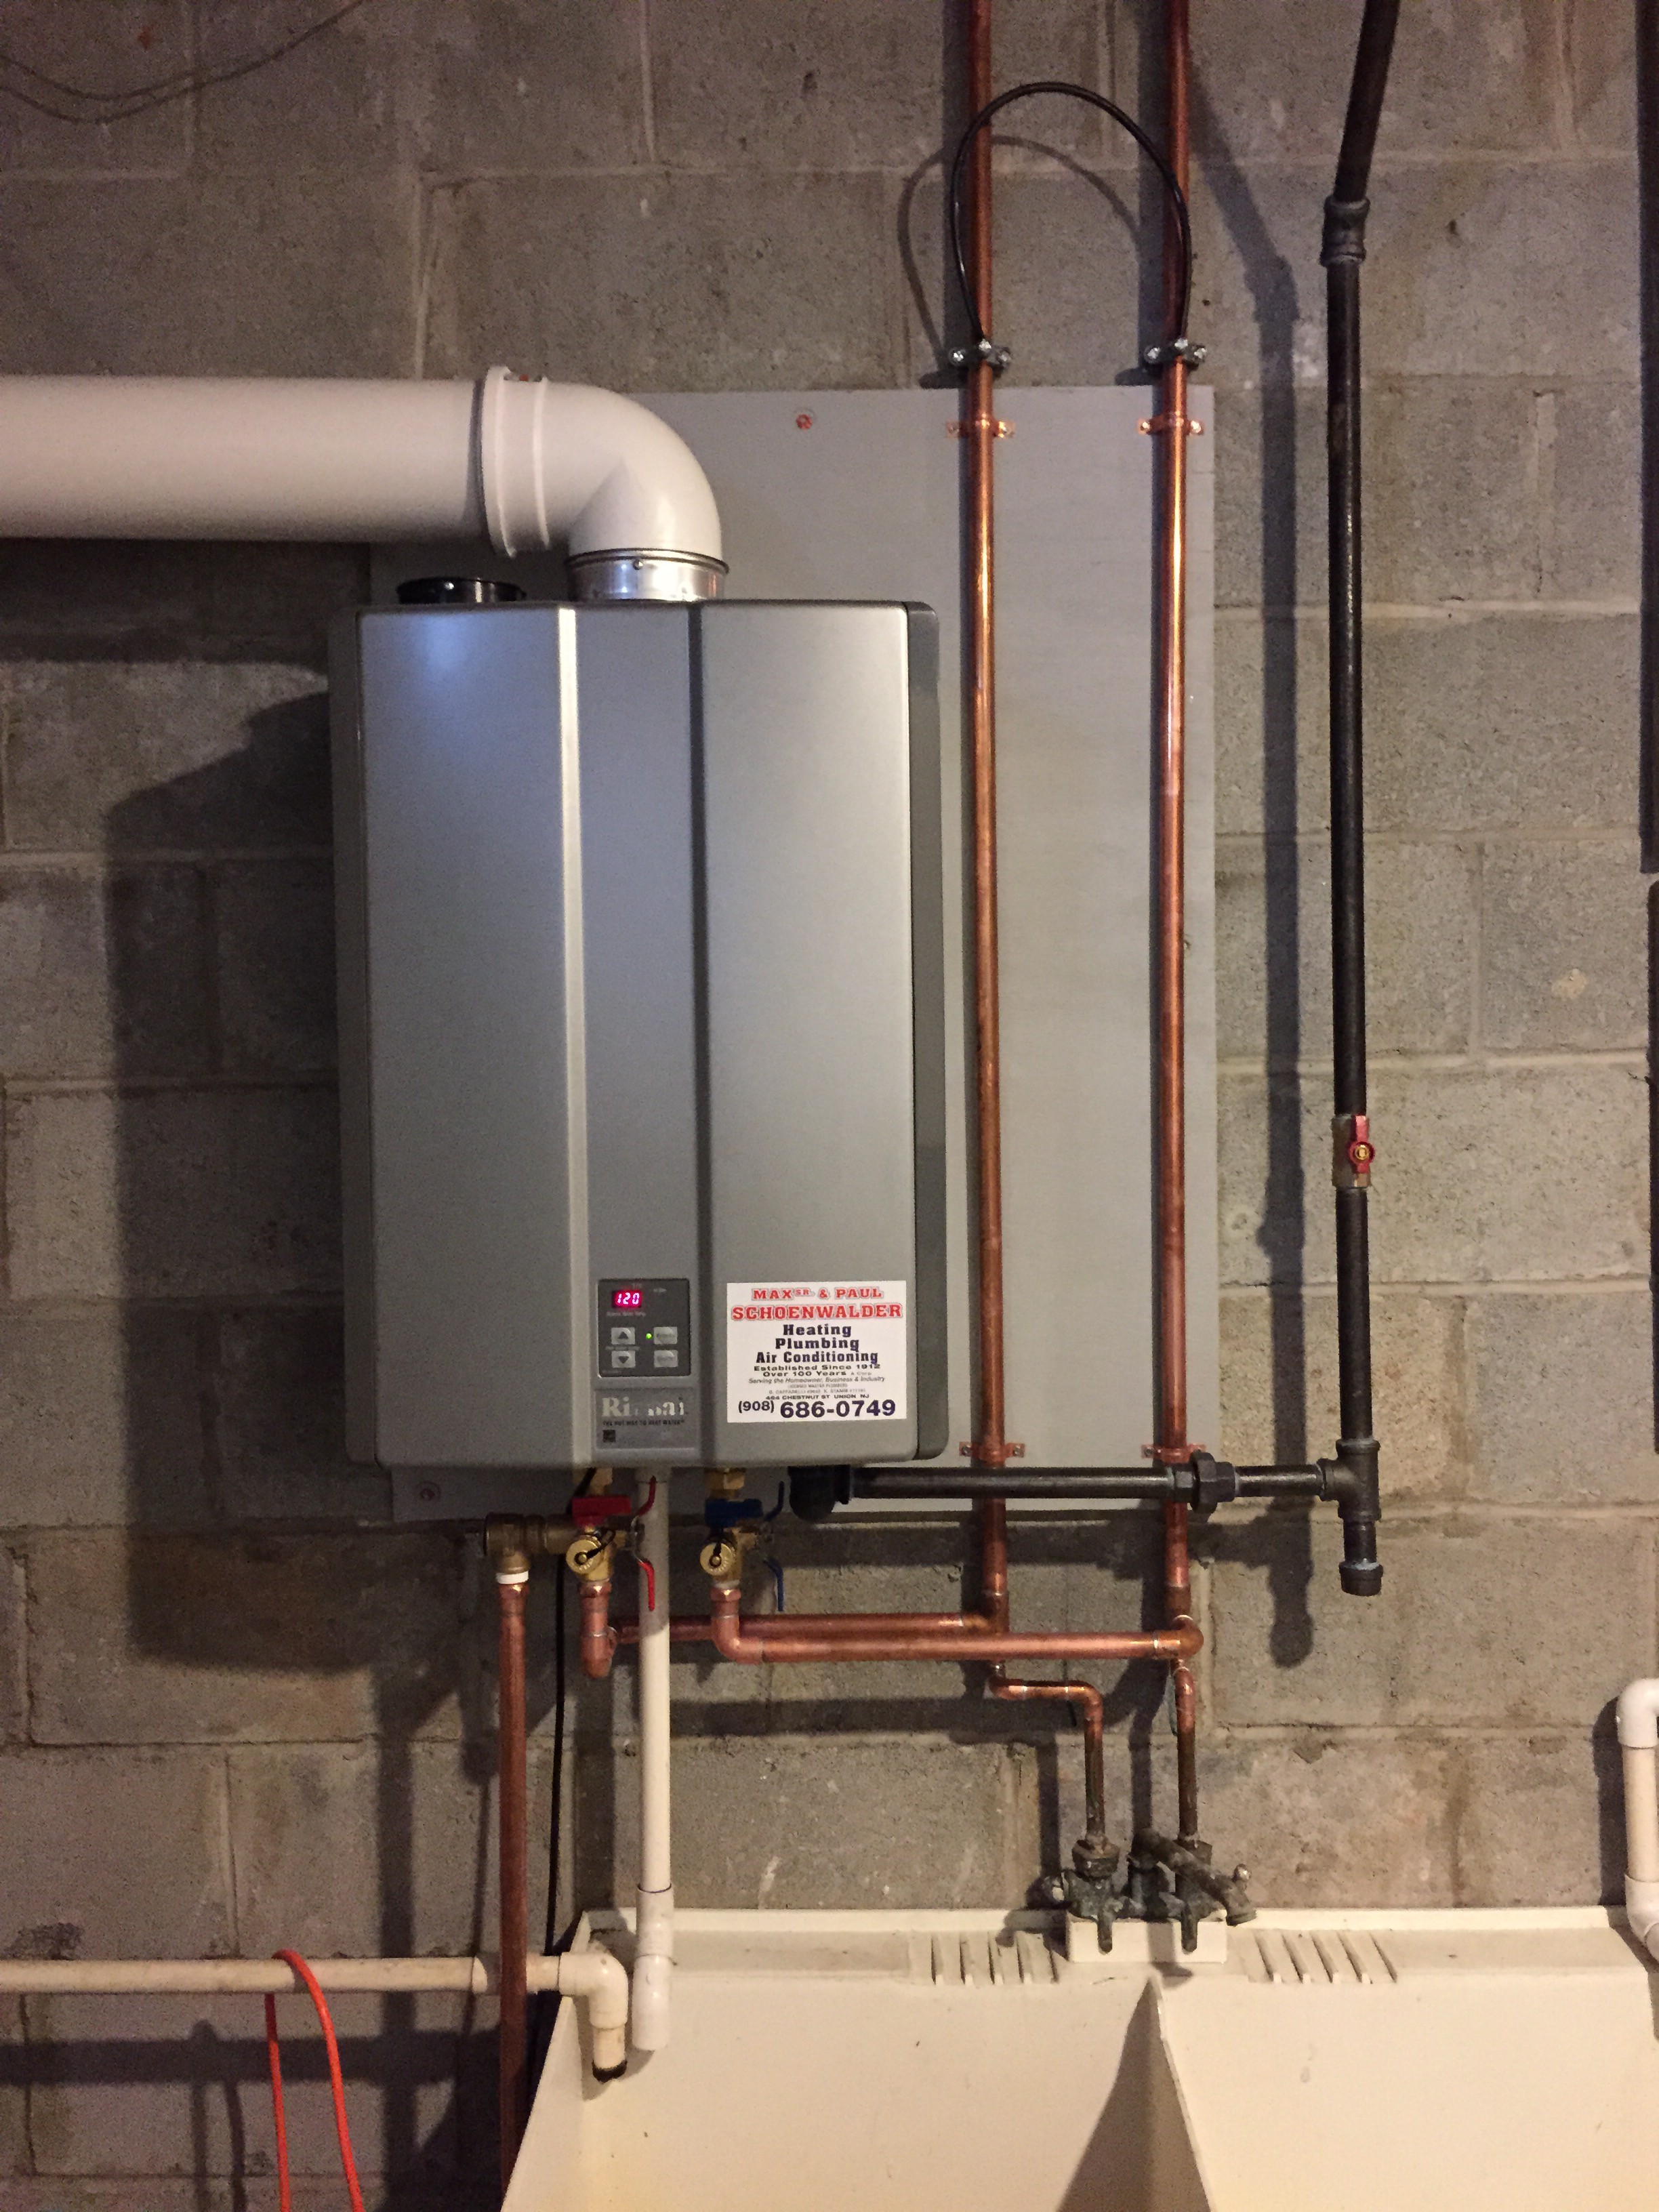 On demand/tankless water heater